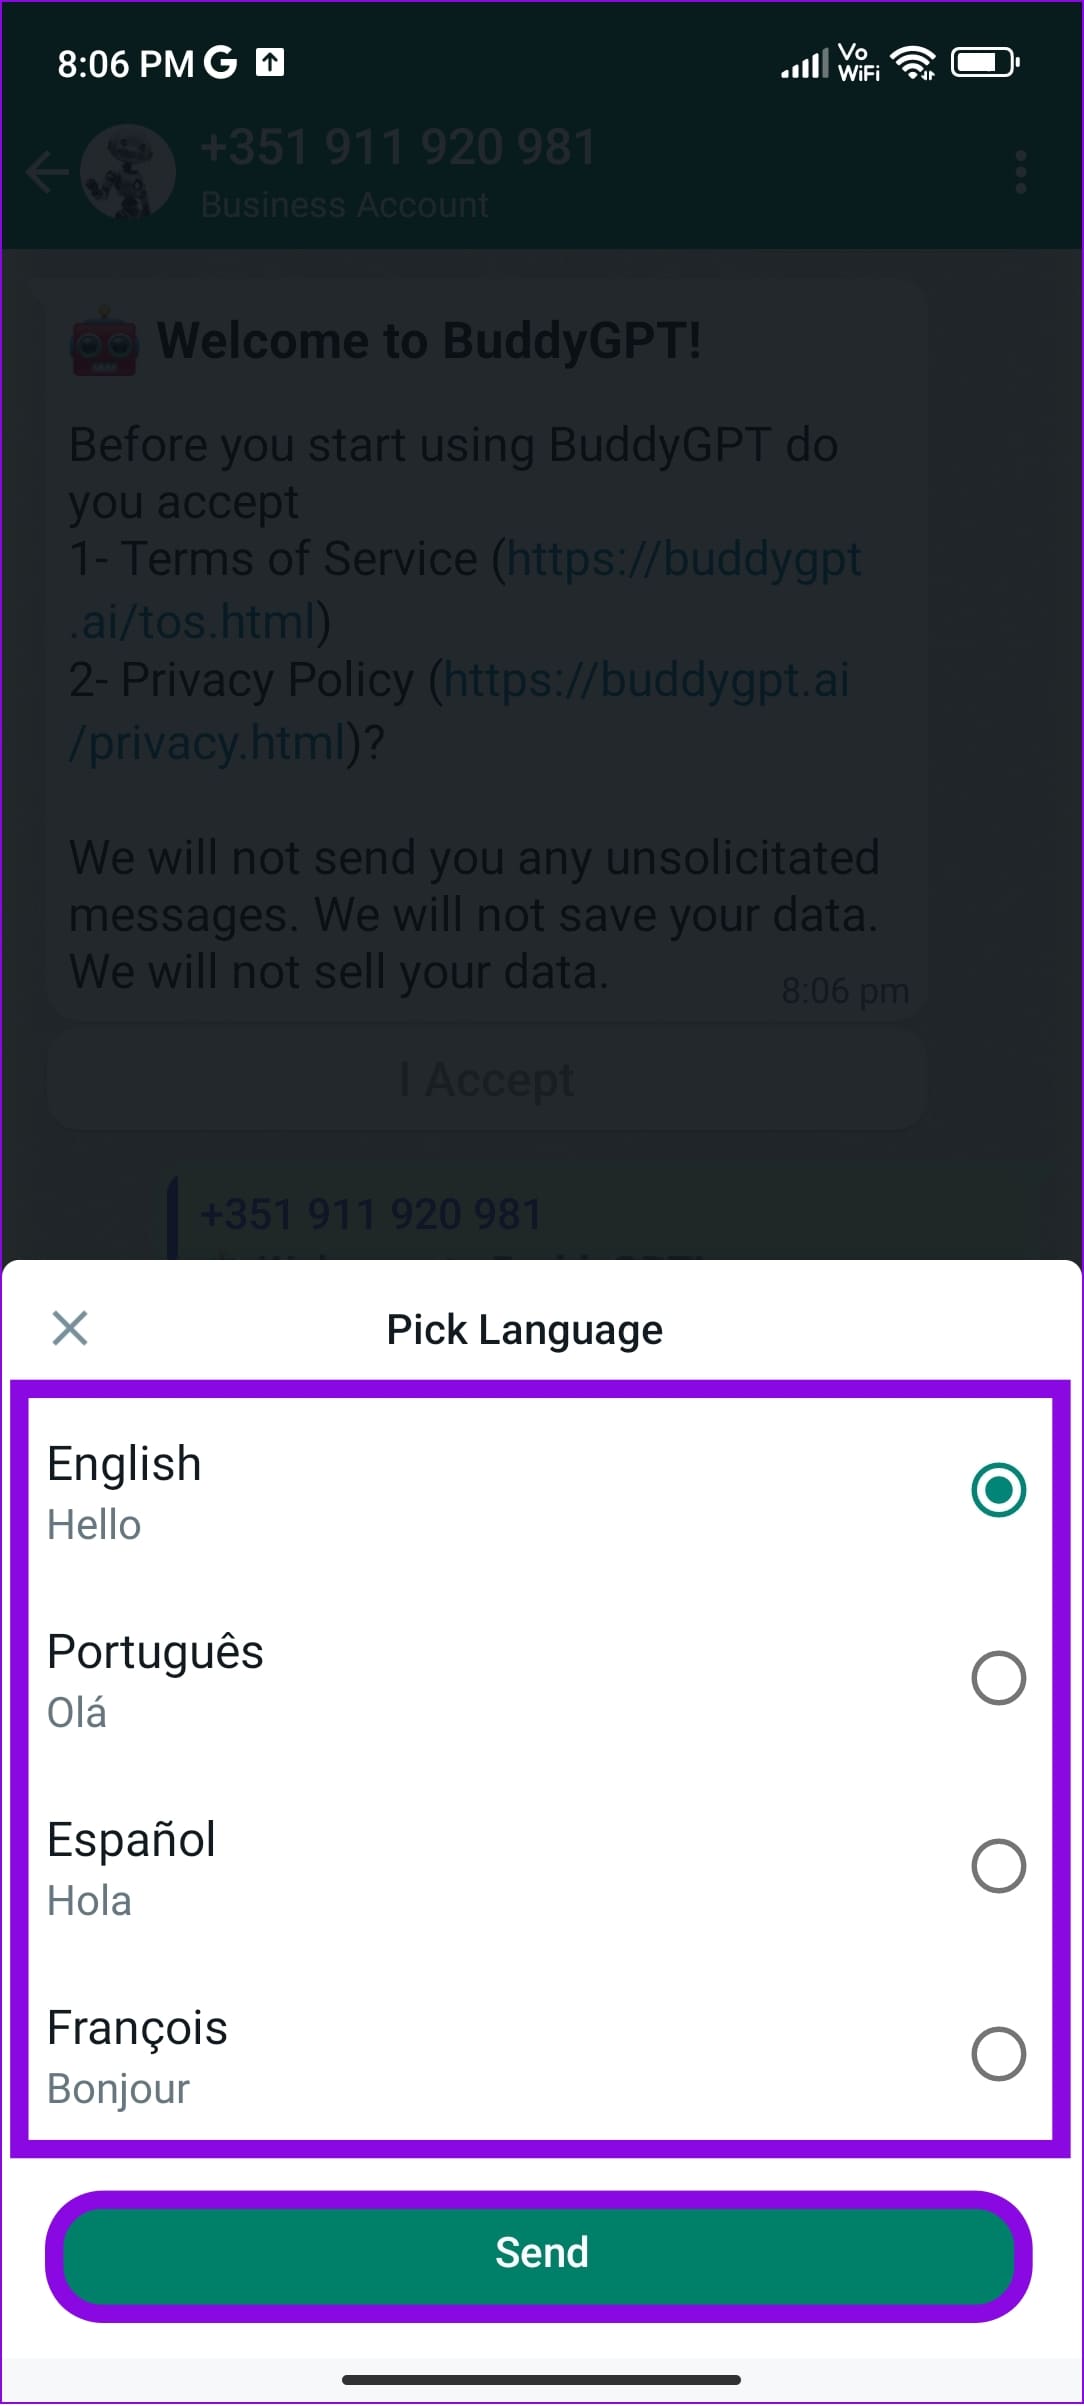 choose the language and tap Send